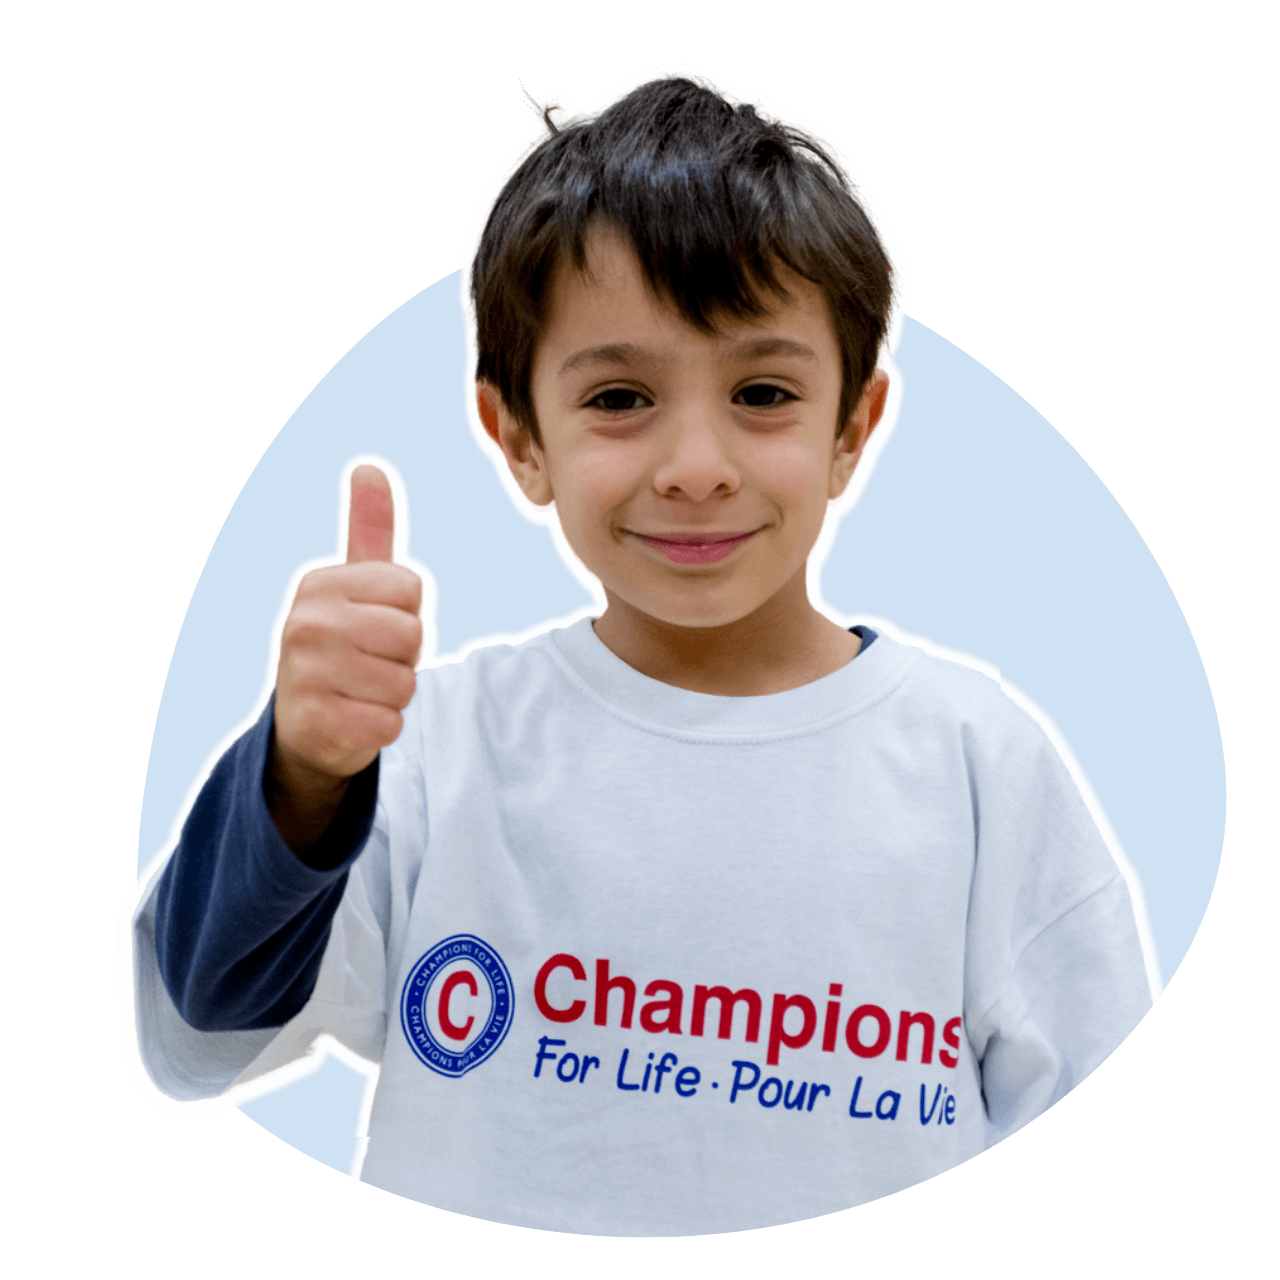 Make a monthly donation to the Champions for Life Foundation